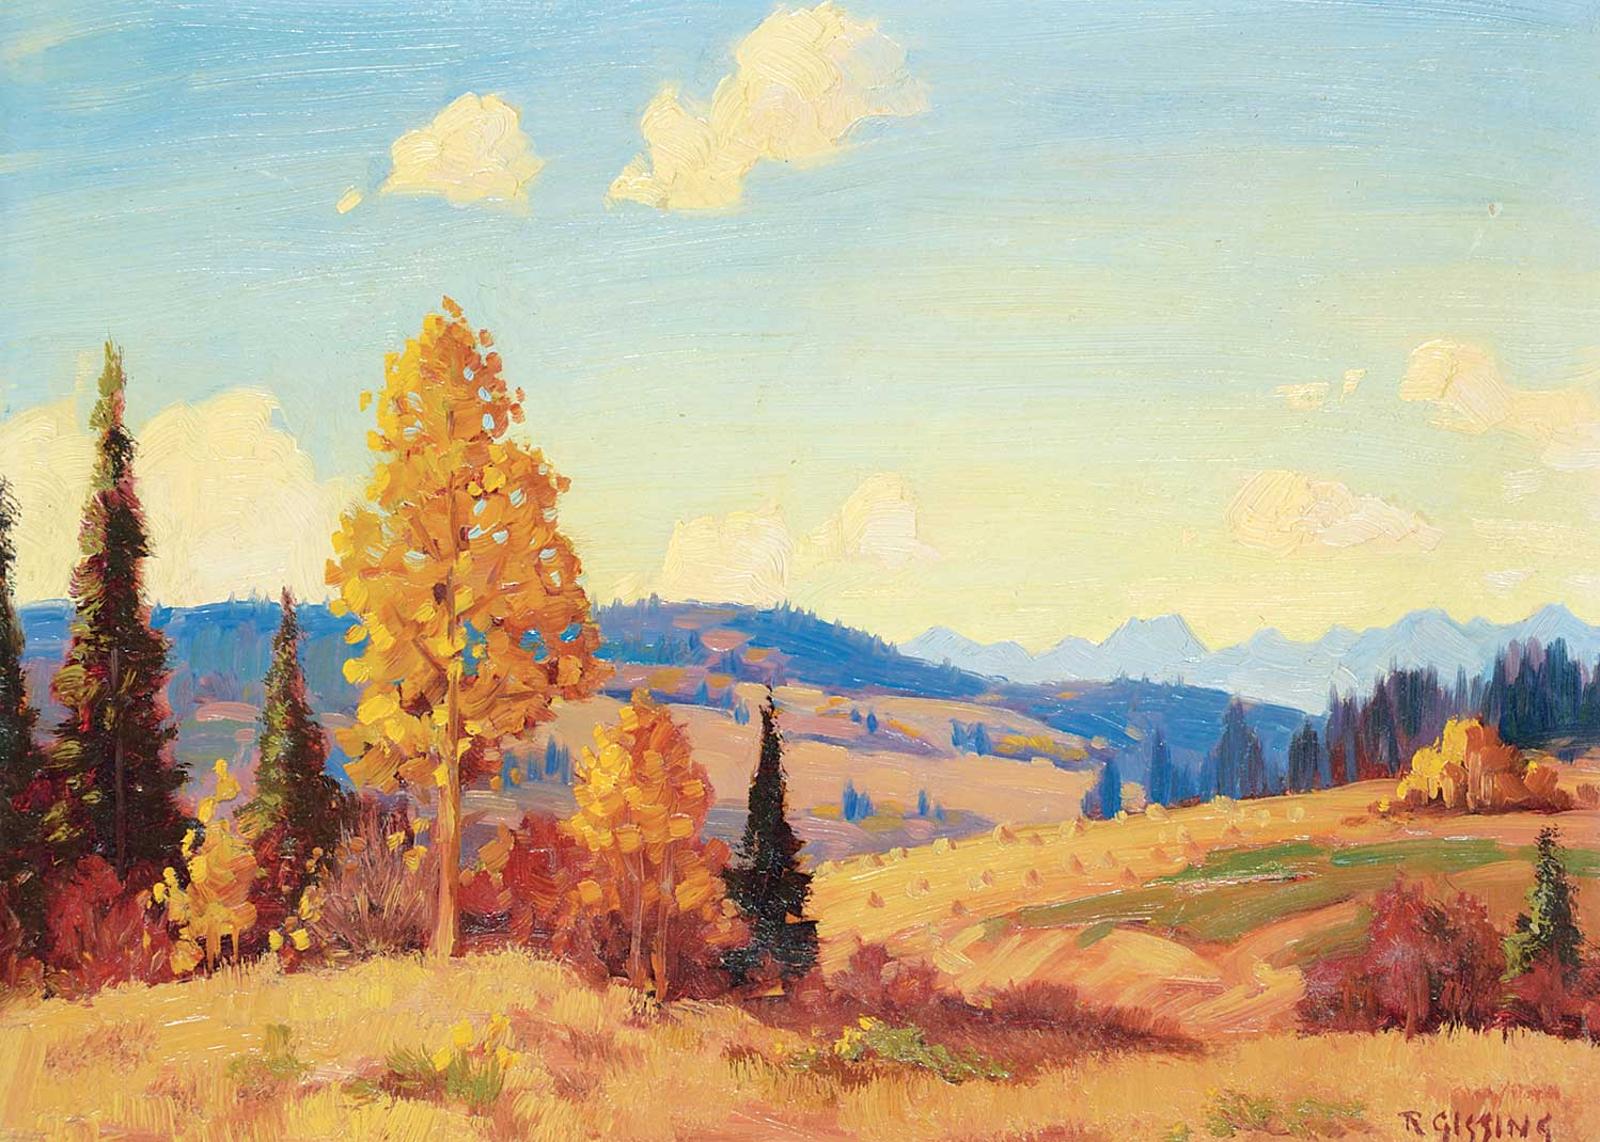 Roland Gissing (1895-1967) - Untitled - Autumn in the Foothills